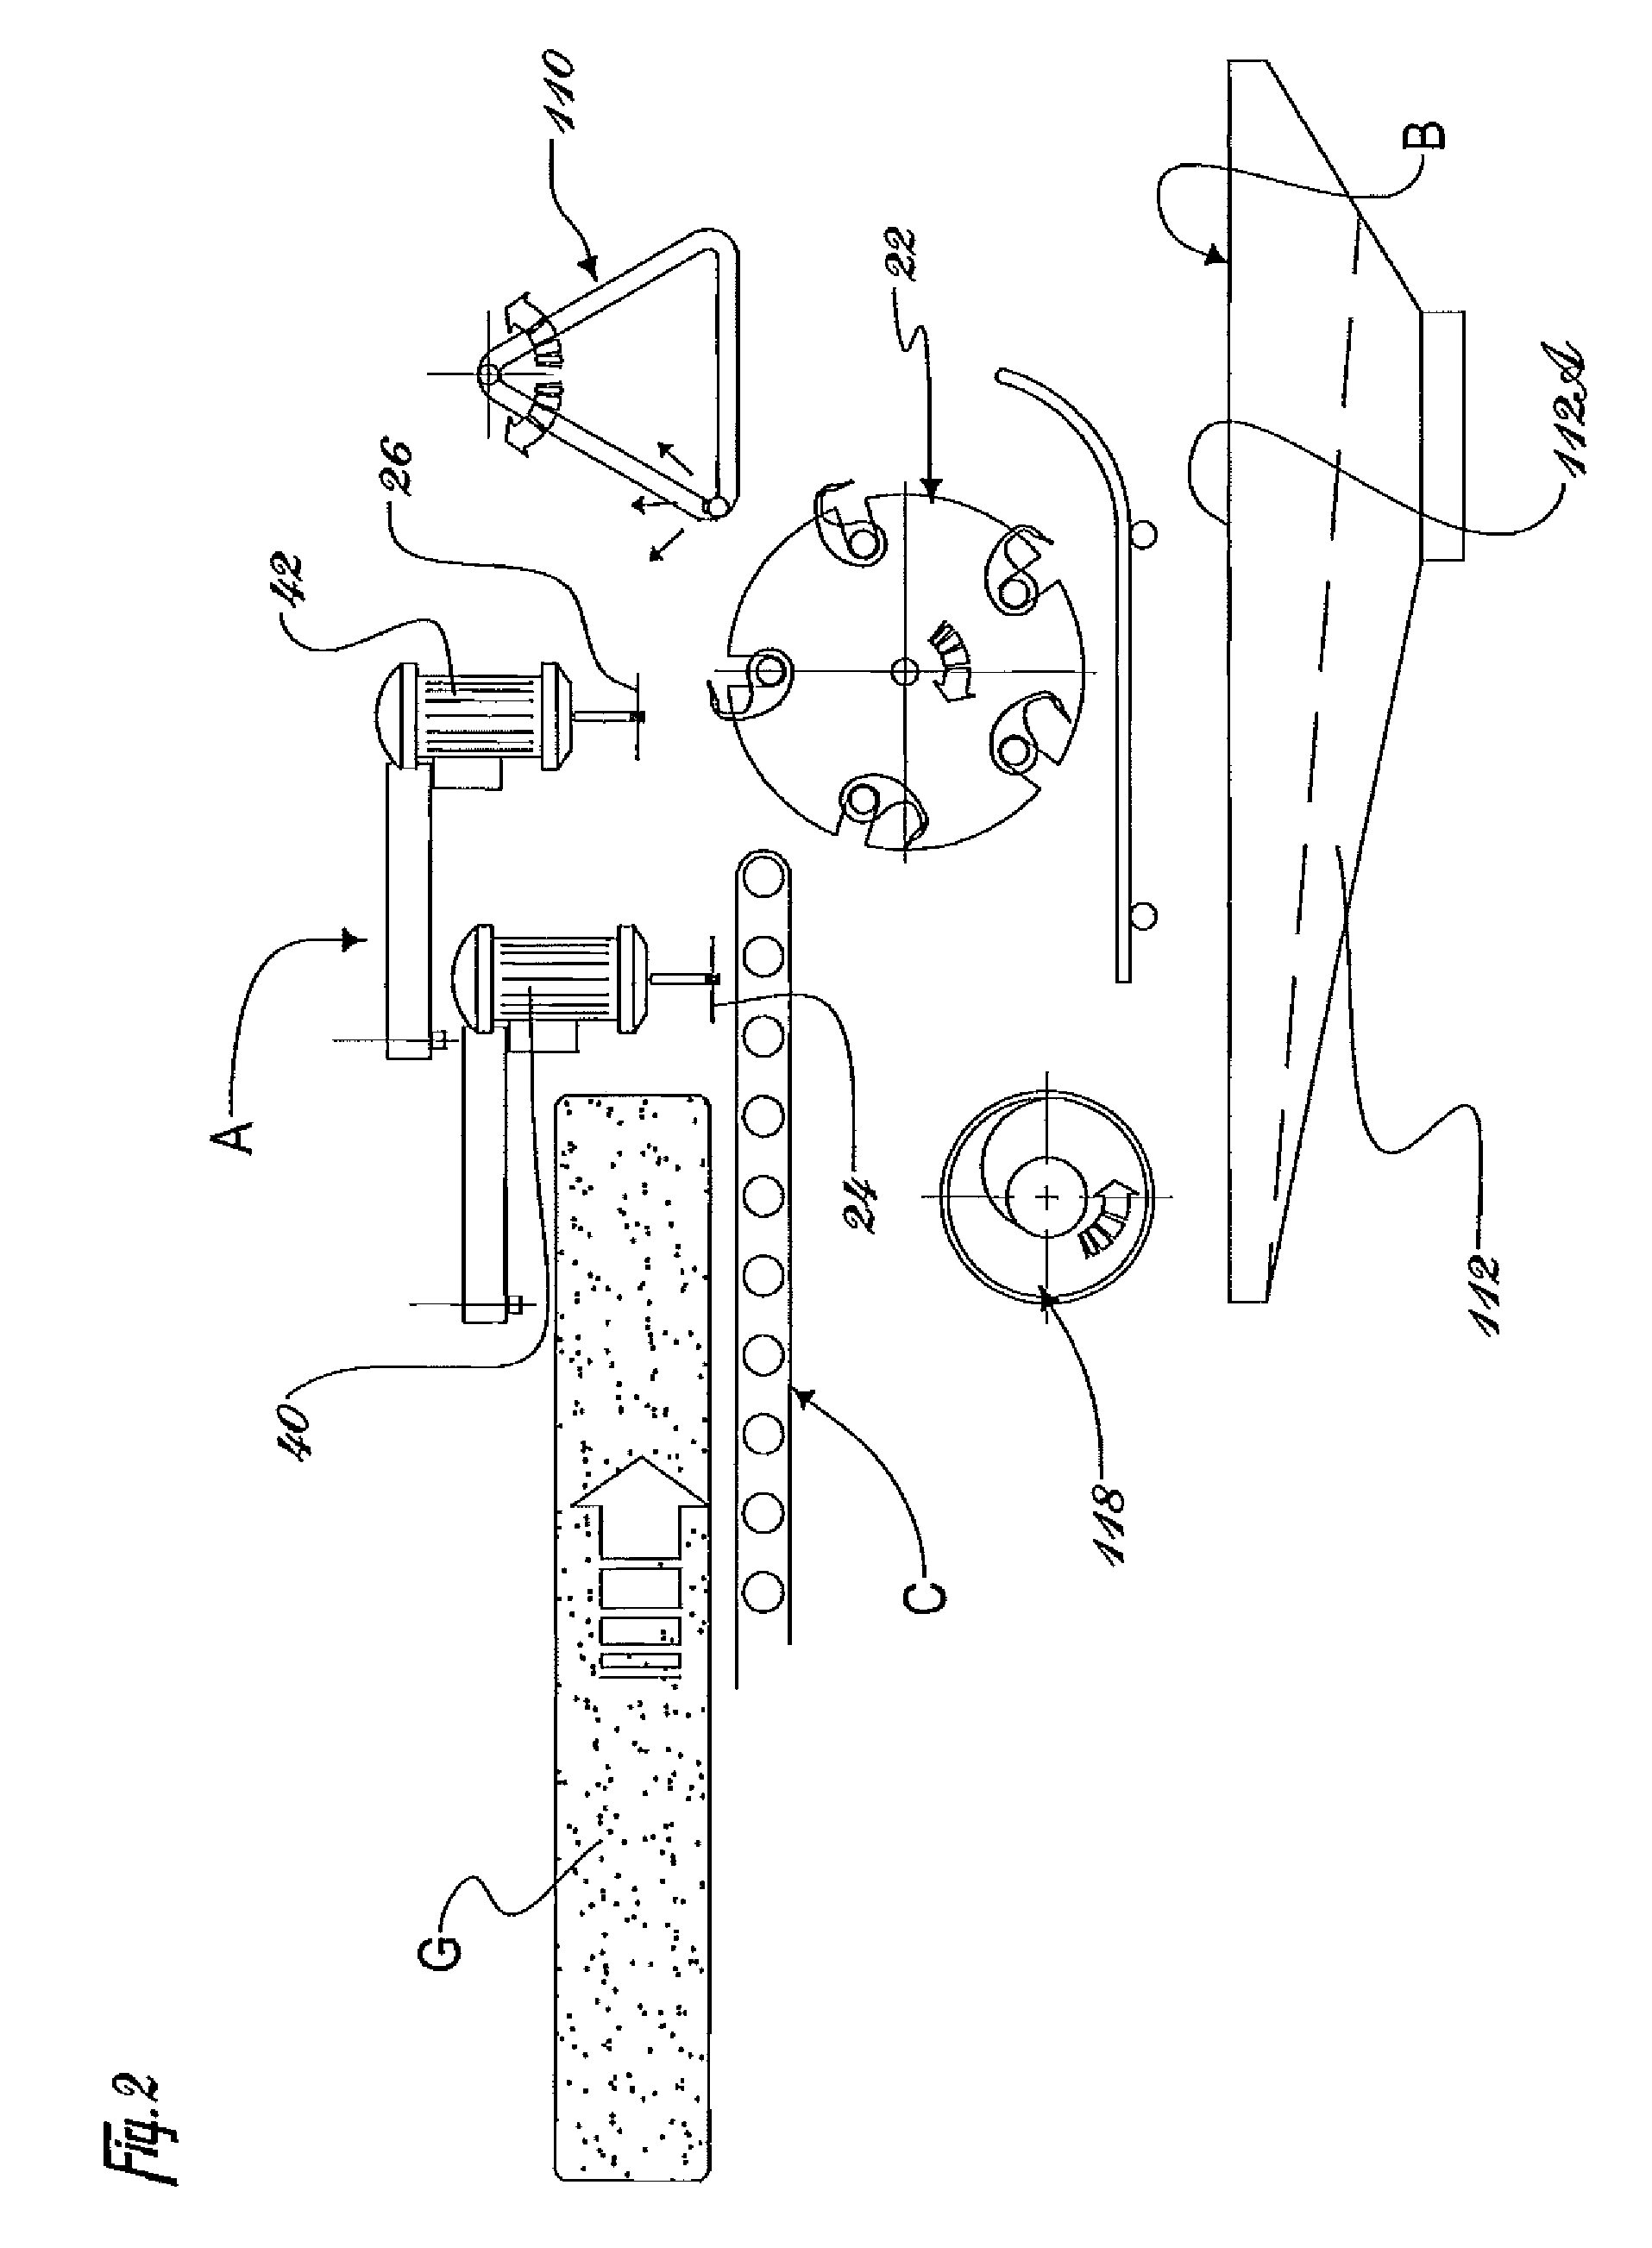 Automatic bag slitter, and method of use thereof